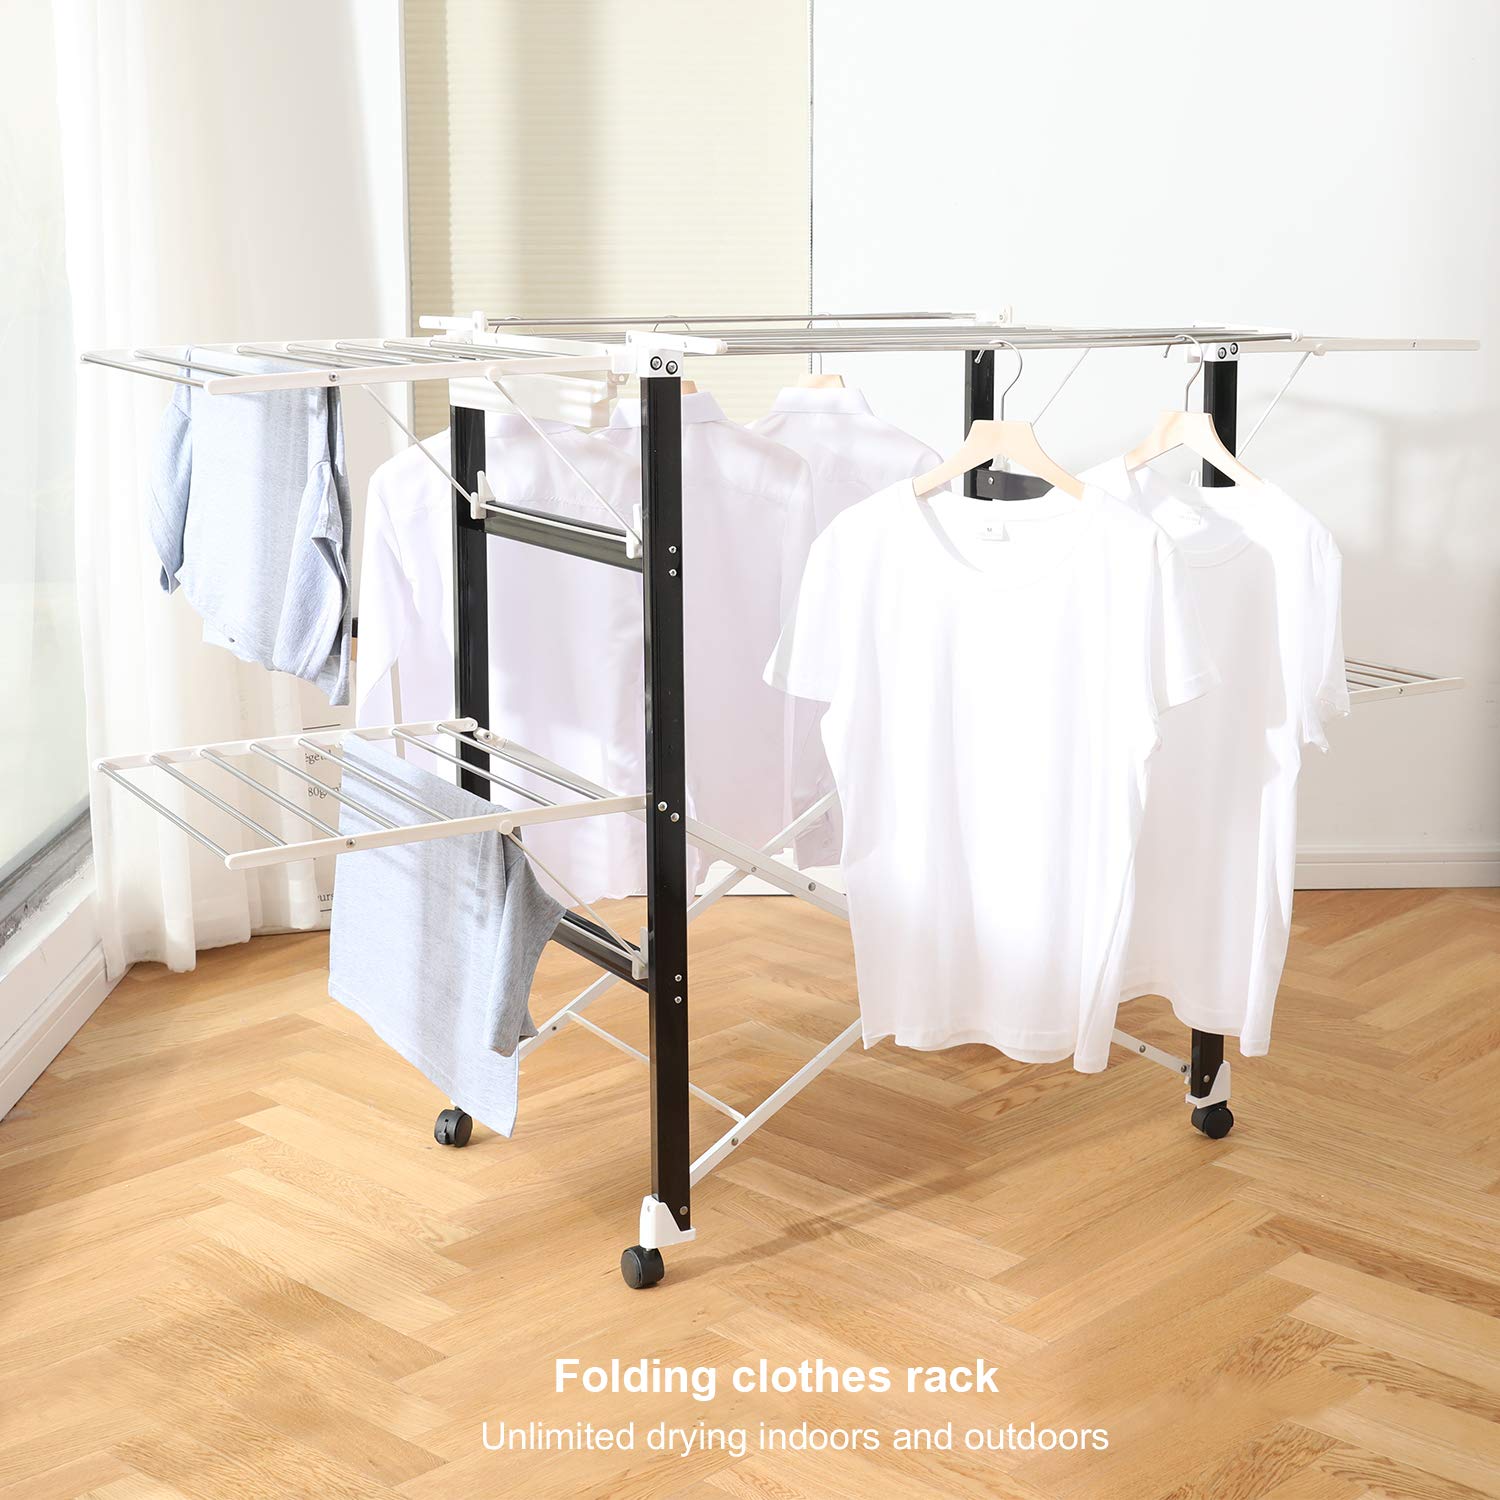 Folding-Laundry-Drying-Rack-Foldable-Laundry-Drying-Rack-174-x-105-x-84-cm-Black-White-Material-ABS-plastic-Stainless-steel